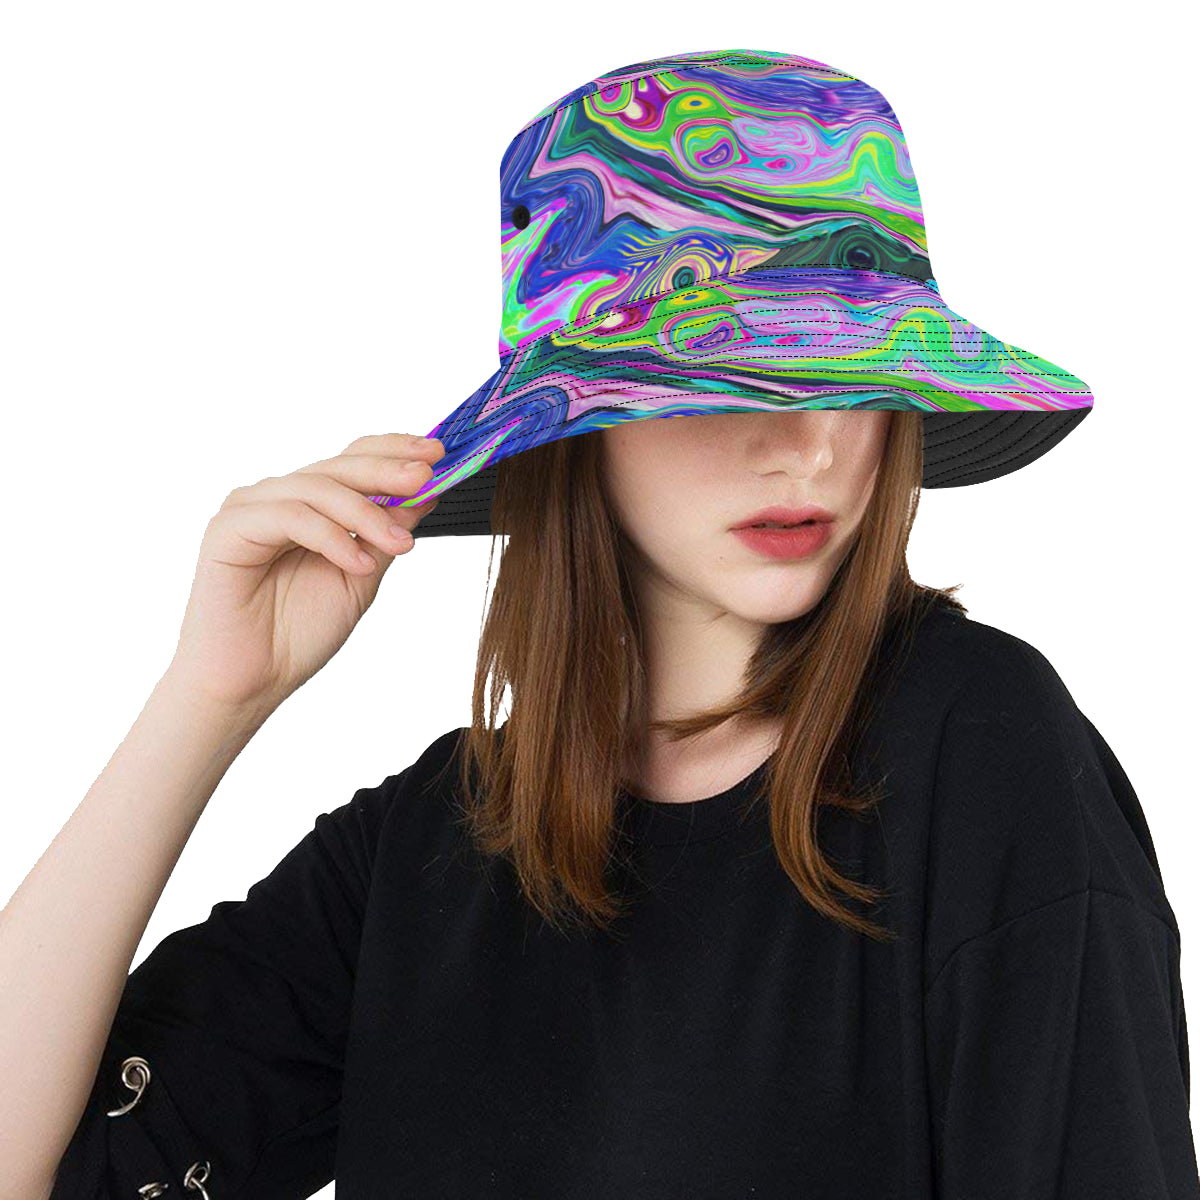 Bucket Hat, Groovy Abstract Aqua and Navy Lava Swirl, Colorful Hat for Women